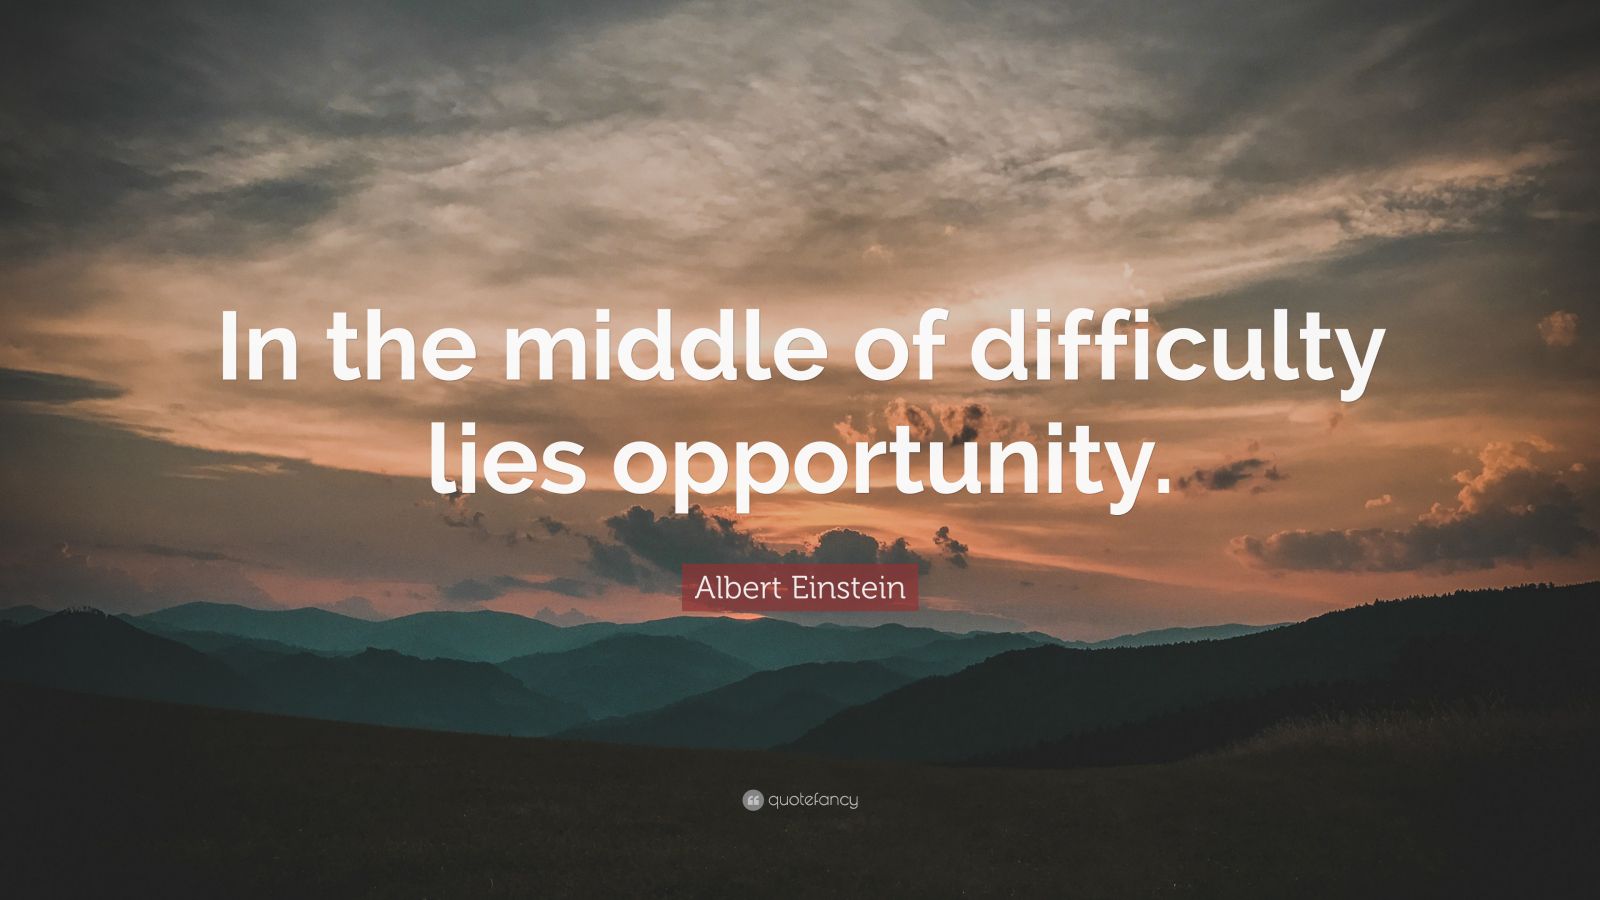 Albert Einstein Quote: “In the middle of difficulty lies opportunity.”